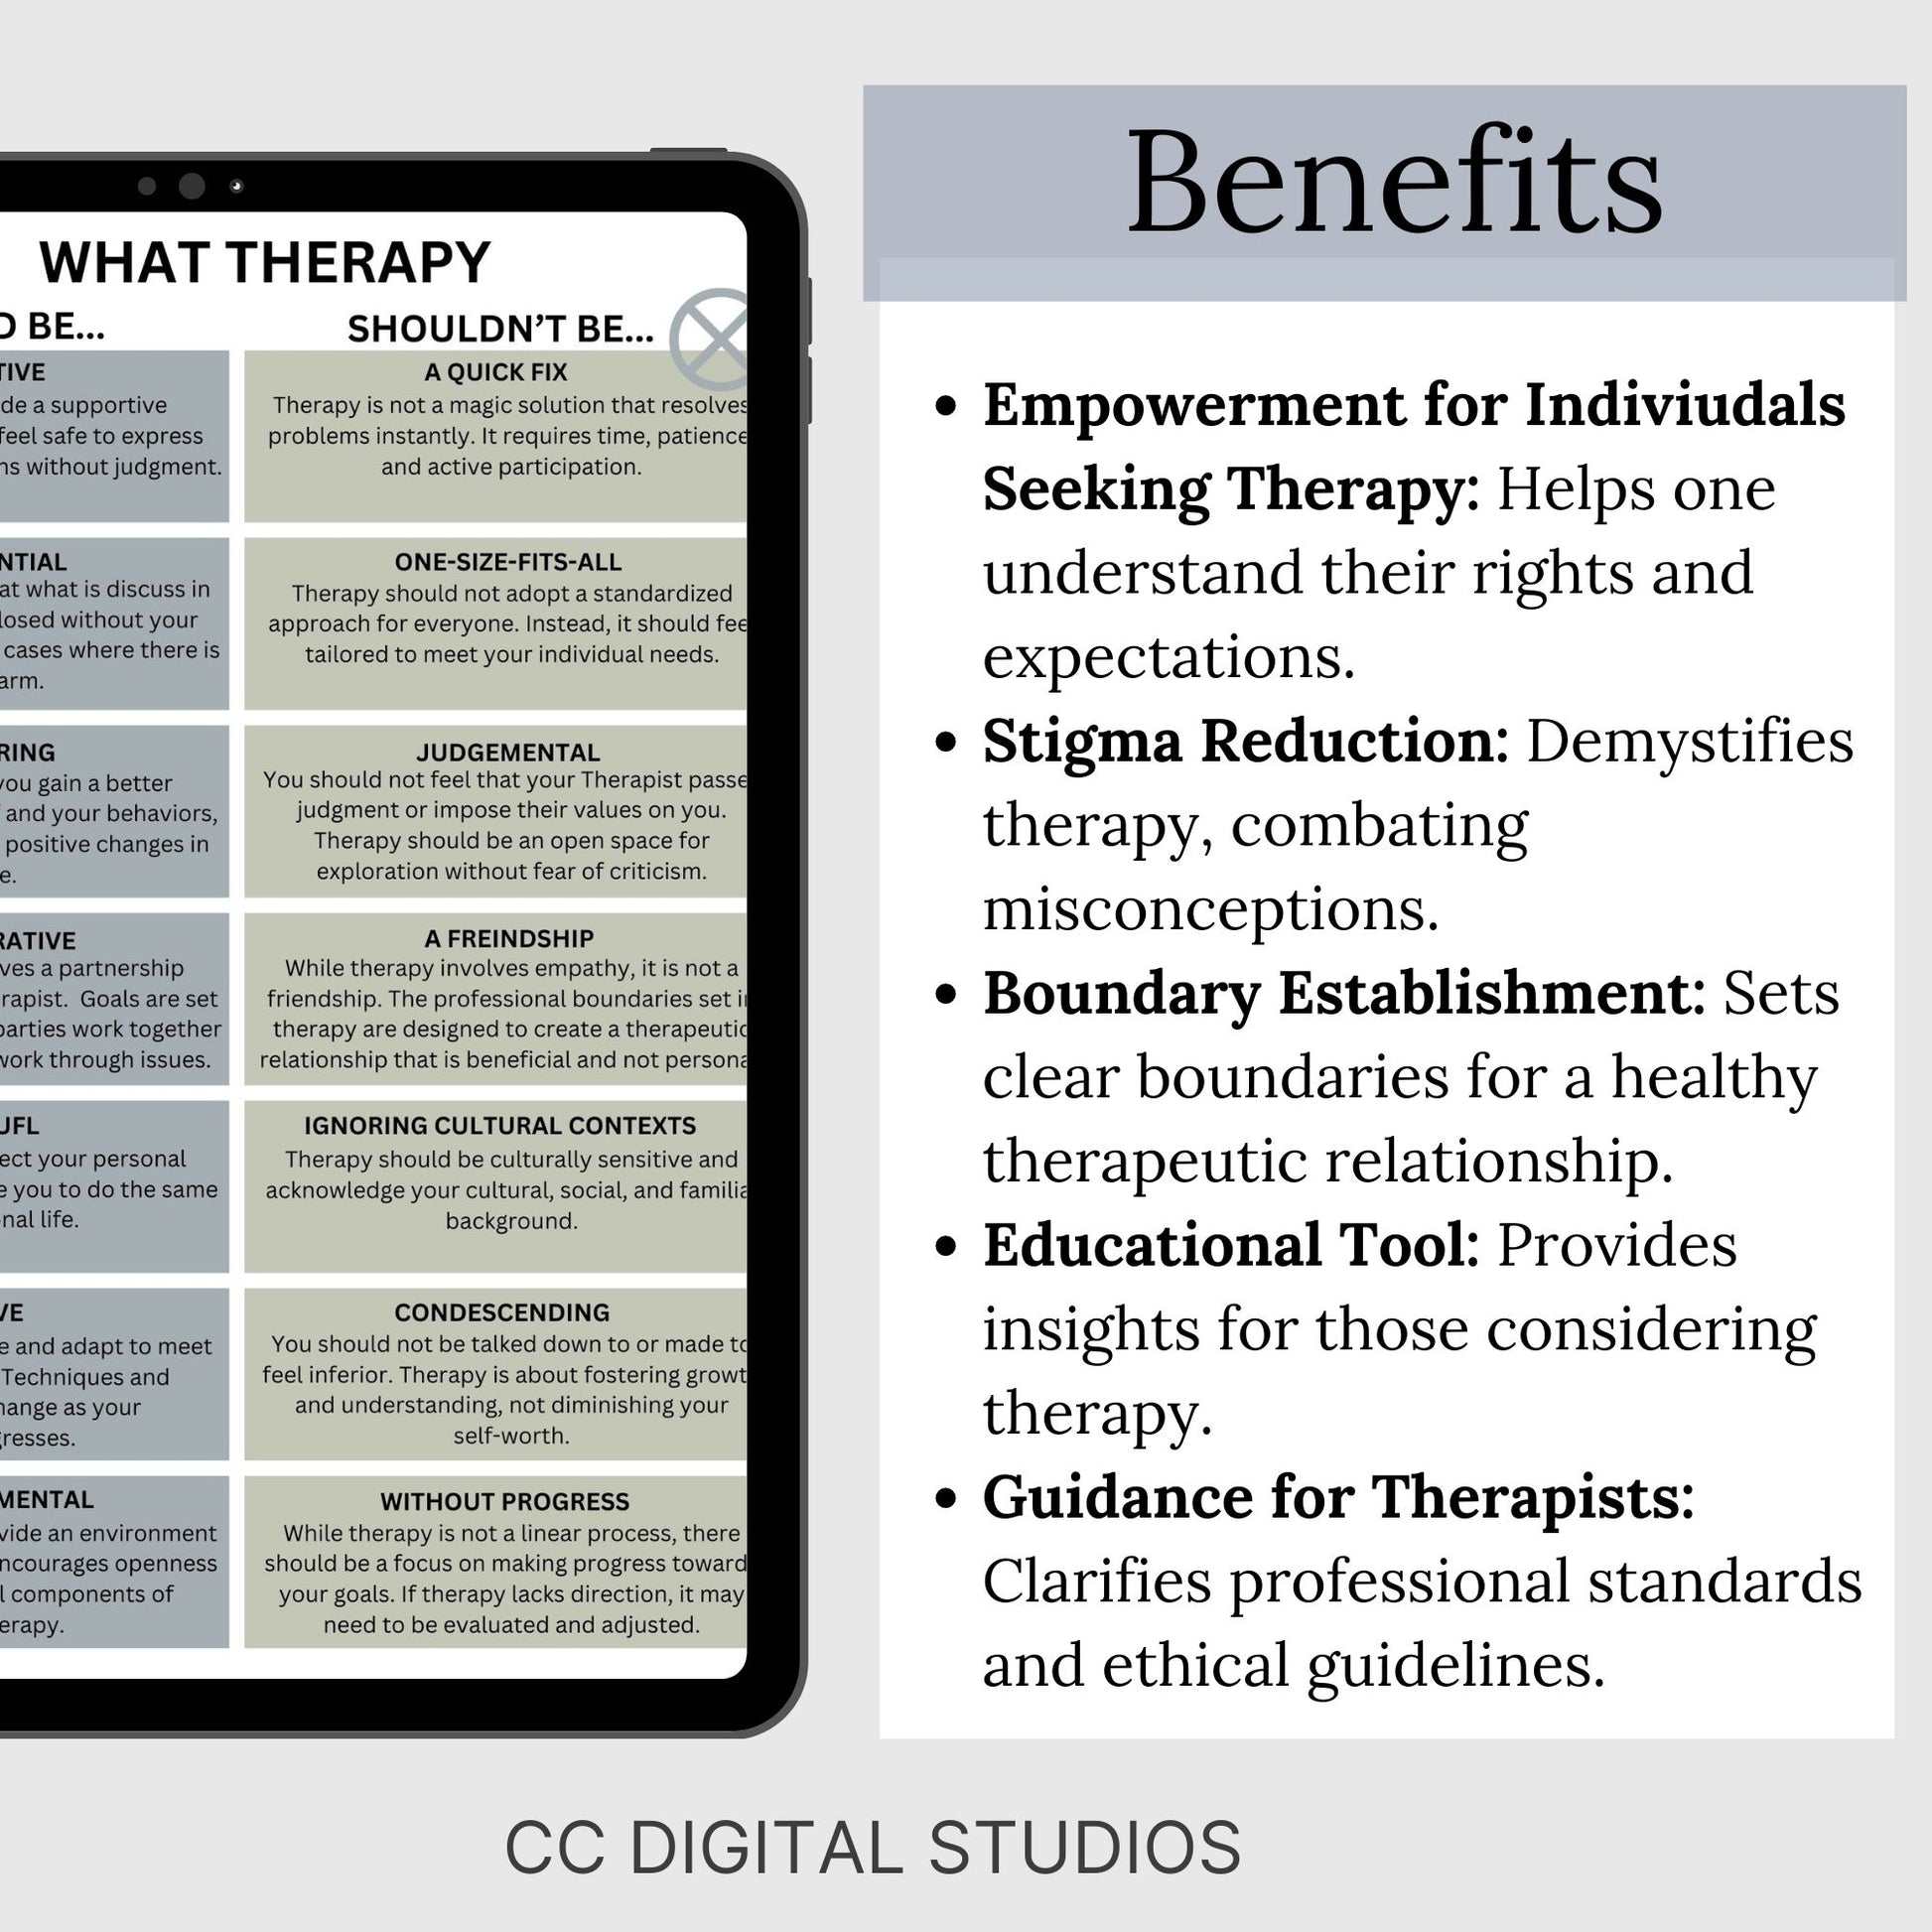 What Therapy Should be handout, perfect for anyone invested in mental well-being.  therapist office, psychologist print, counseling, therapy resources, therapy tools, psychology, counseling